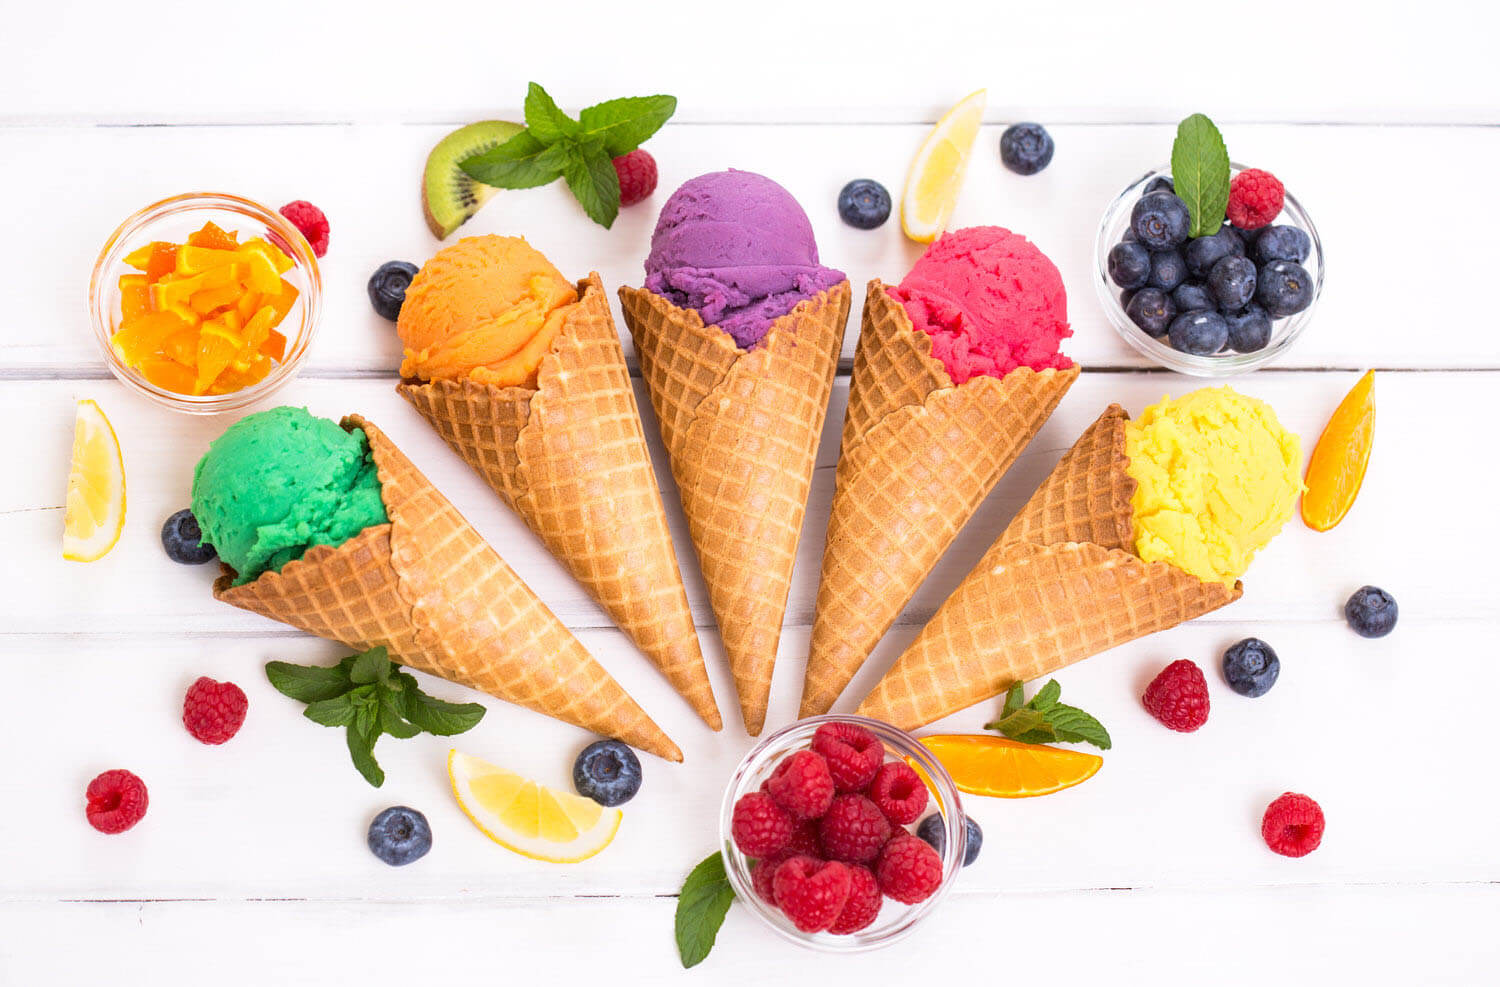 Different kinds of ice cream according to ice cream recipes